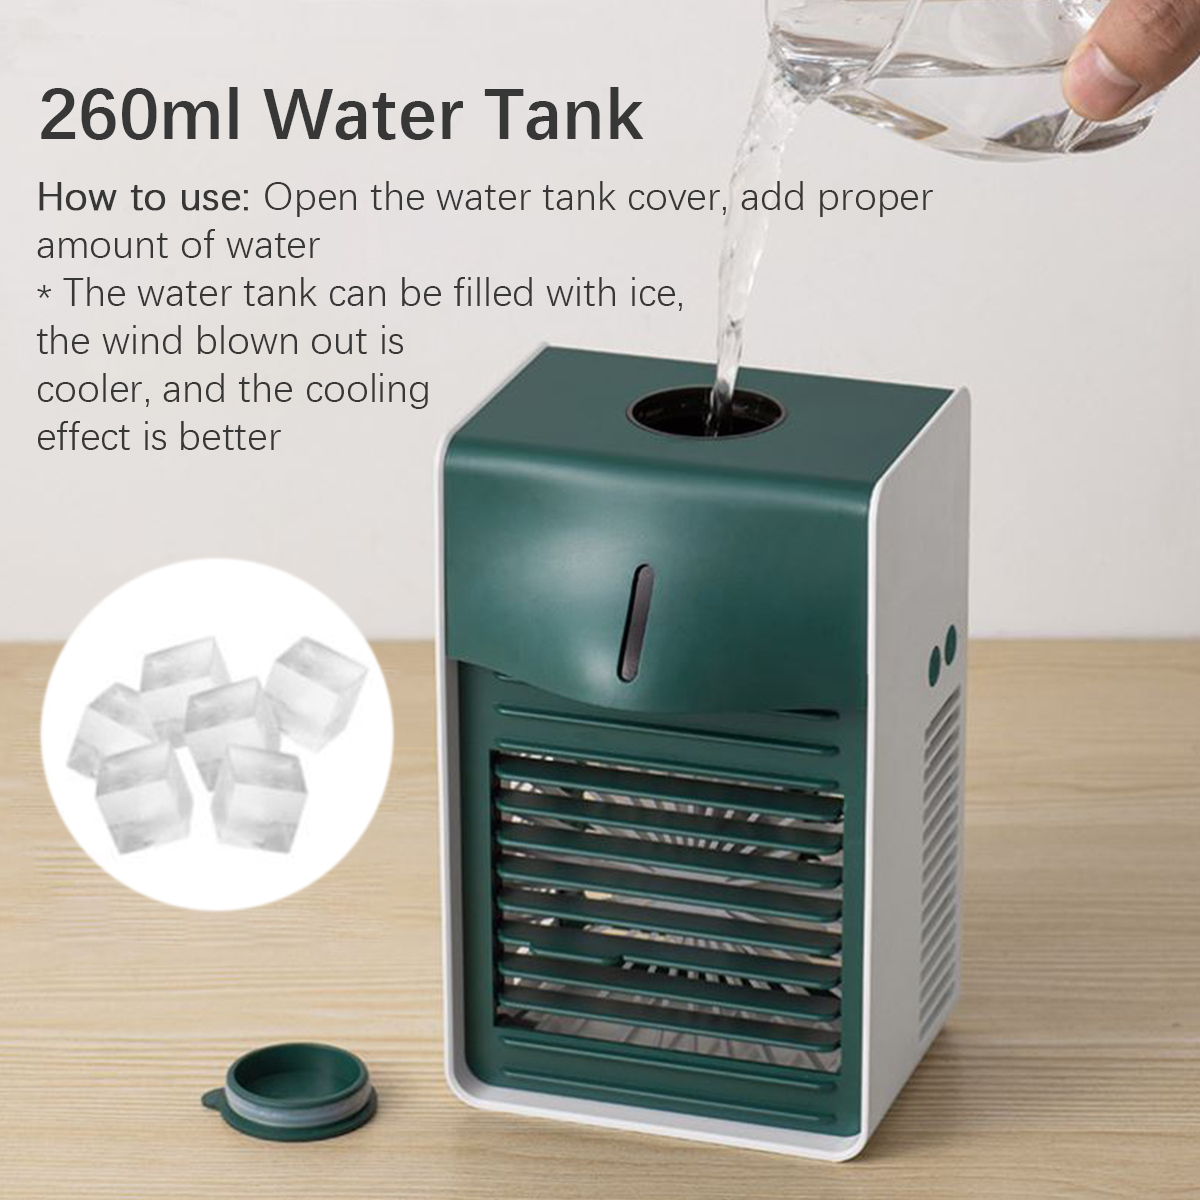 Bakeey-Personal-Portable-Cooler-AC-Air-Conditioner-USB-Charging-Air-Fan-Humidifier-1849216-2